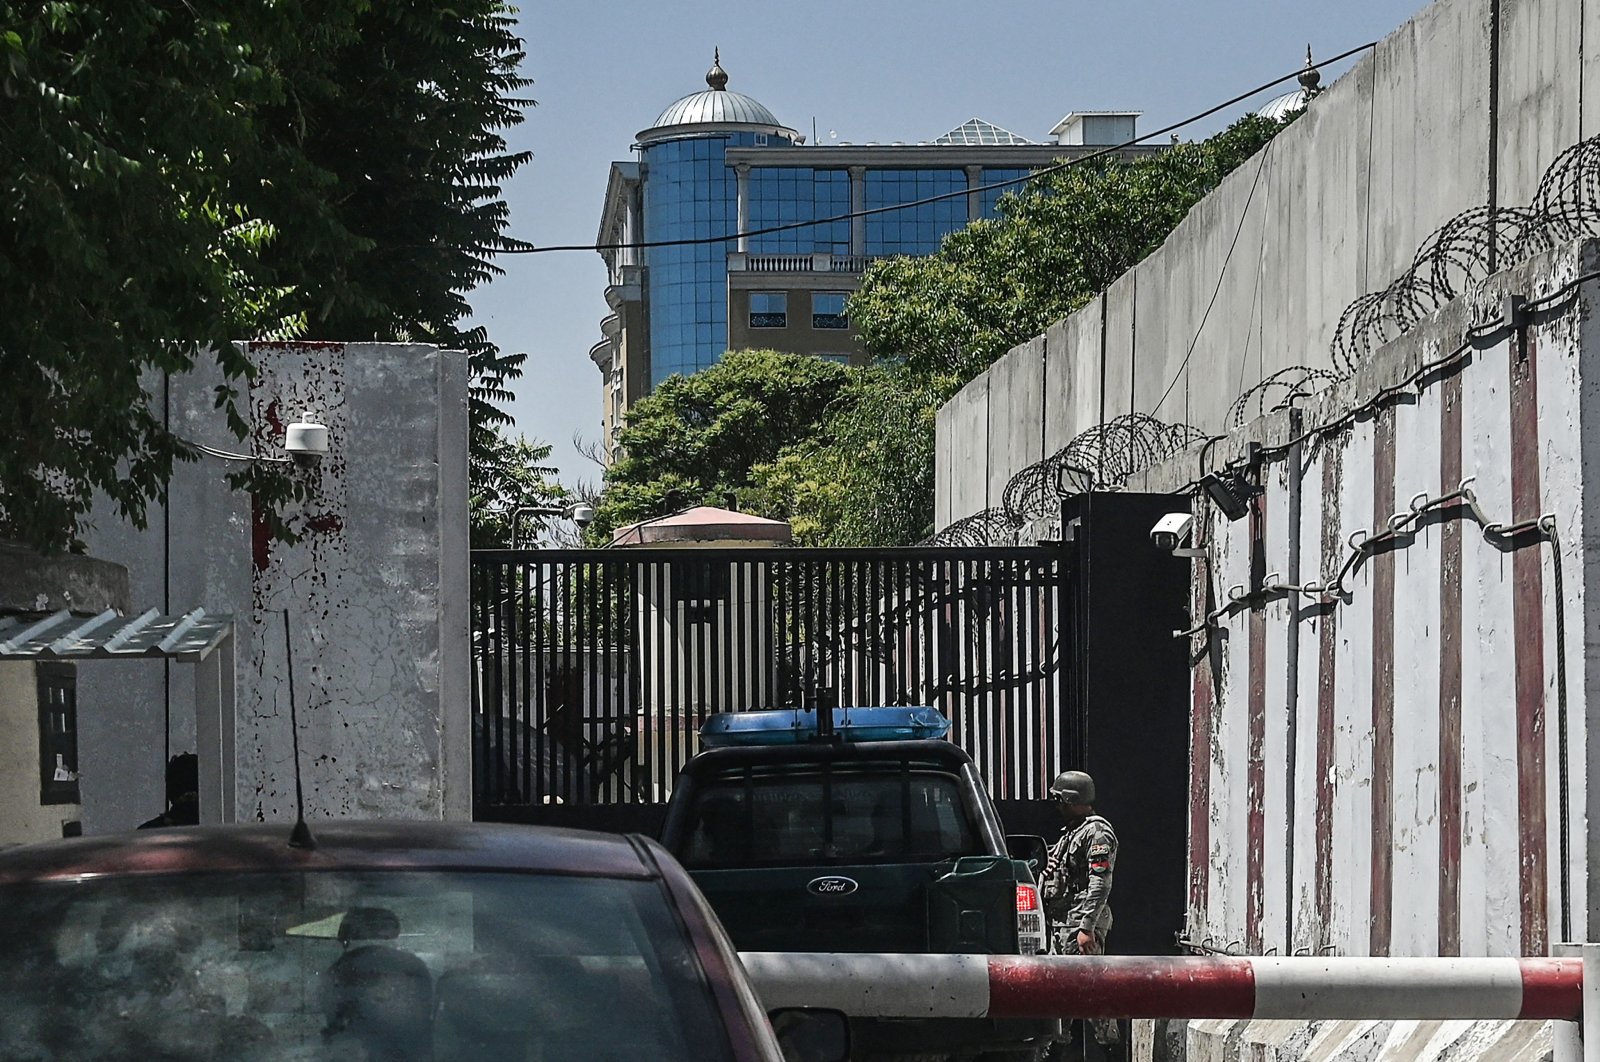 A security officer stands guard in front of an entrance gate near the Australian Embassy at the Green Zone in Kabul on May 25, 2021, after Australia abruptly announced it will shutter its embassy in Afghanistan this week over security fears as foreign troops withdraw. (AFP Photo)